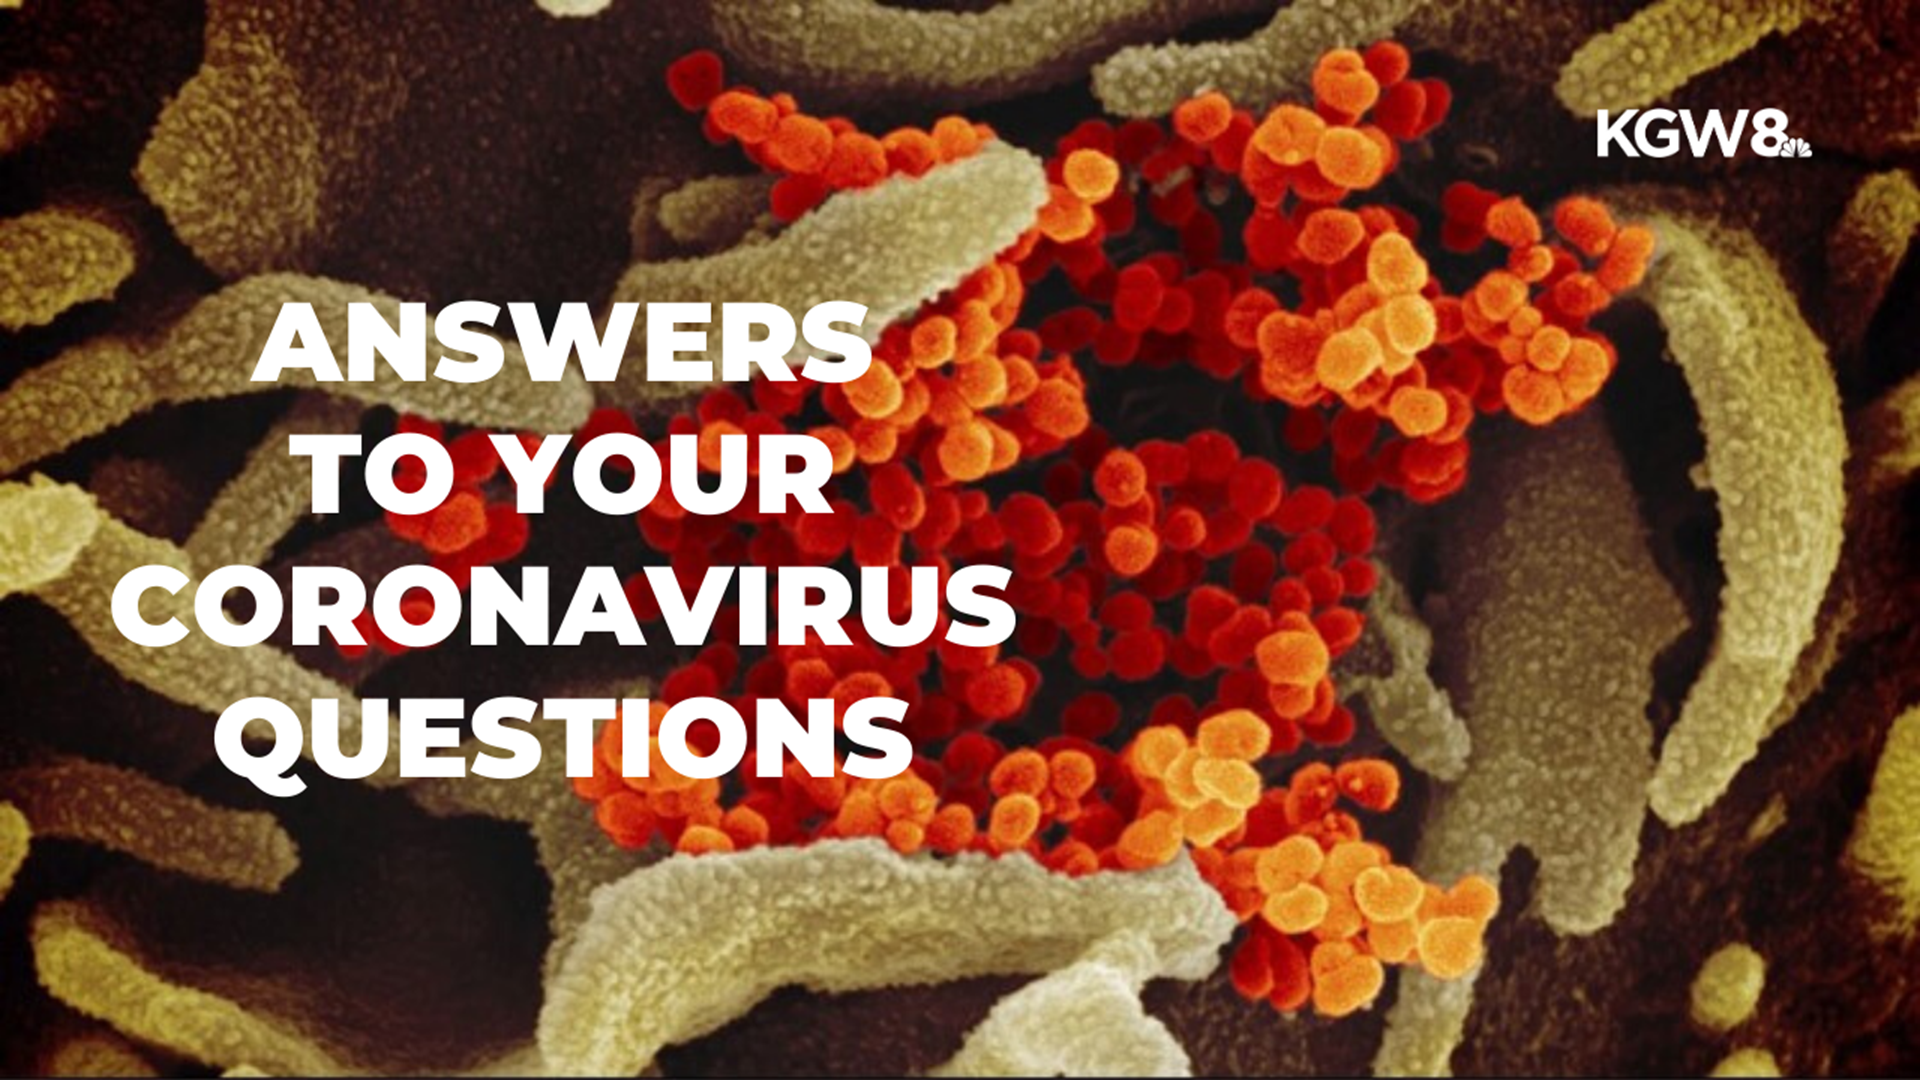 Plenty of you have questions surrounding the new strain of coronavirus and how to protect yourself. Morgan Romero has some answers.